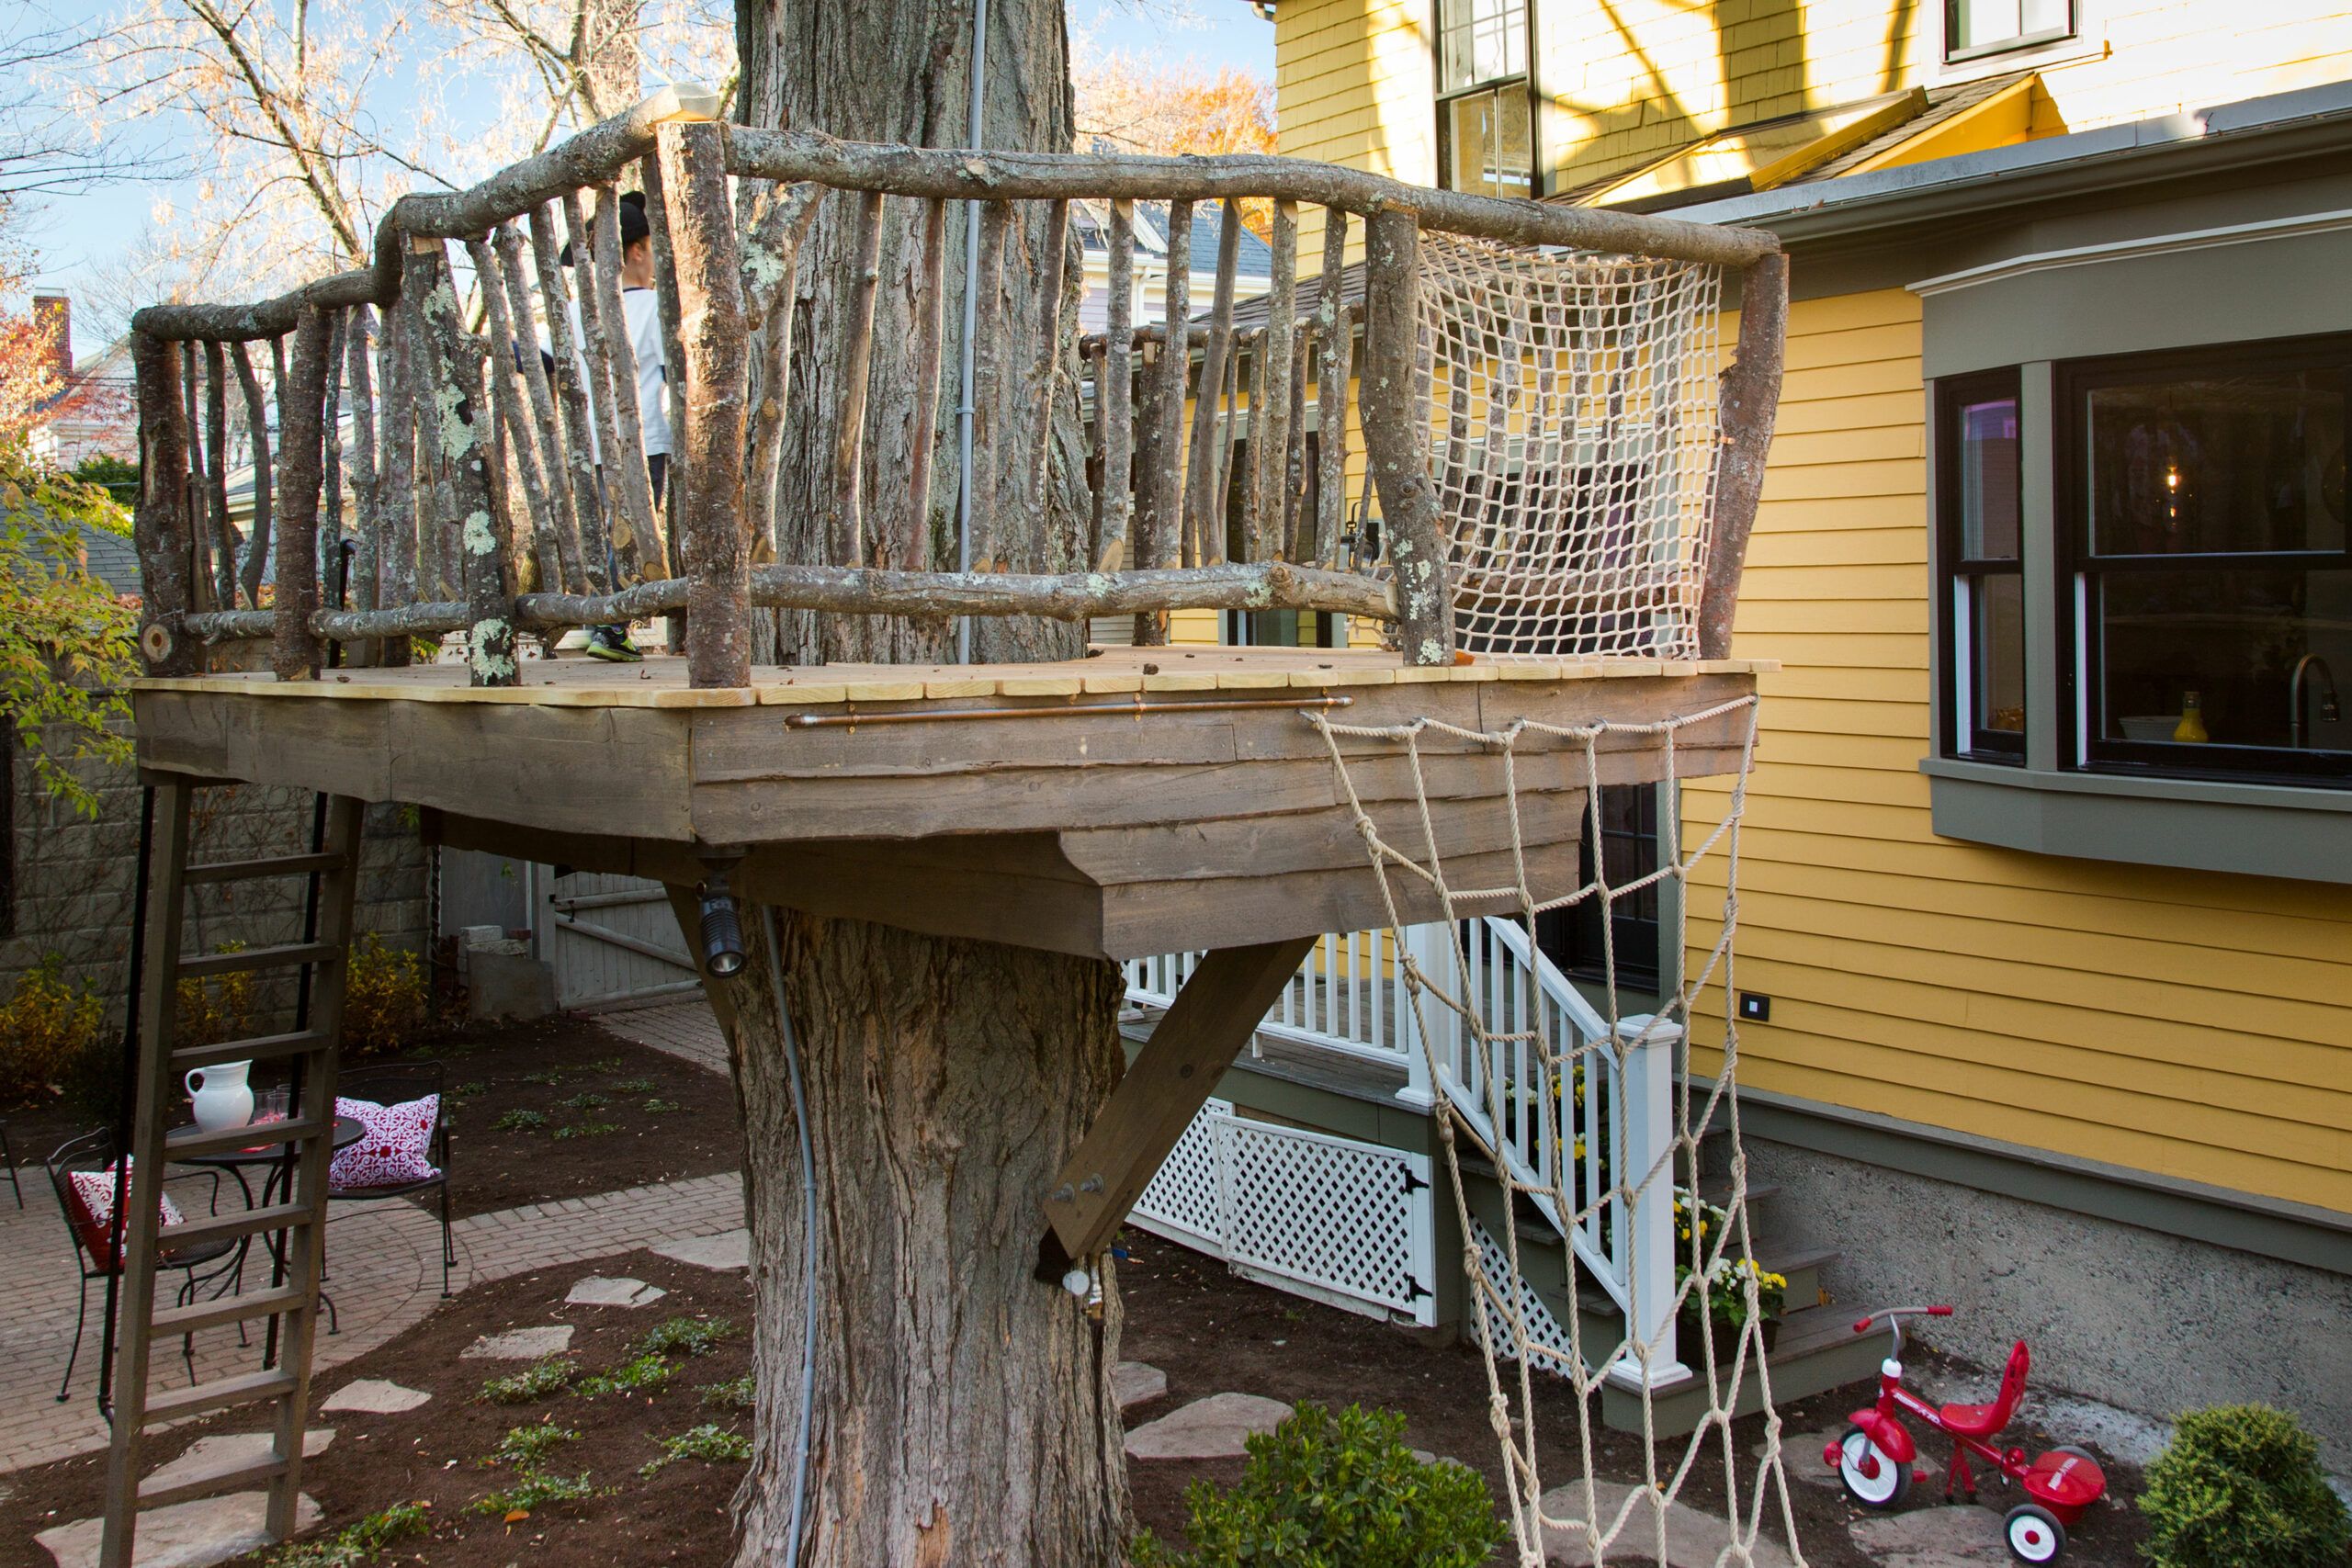 How To Build A Diy Treehouse - This Old House